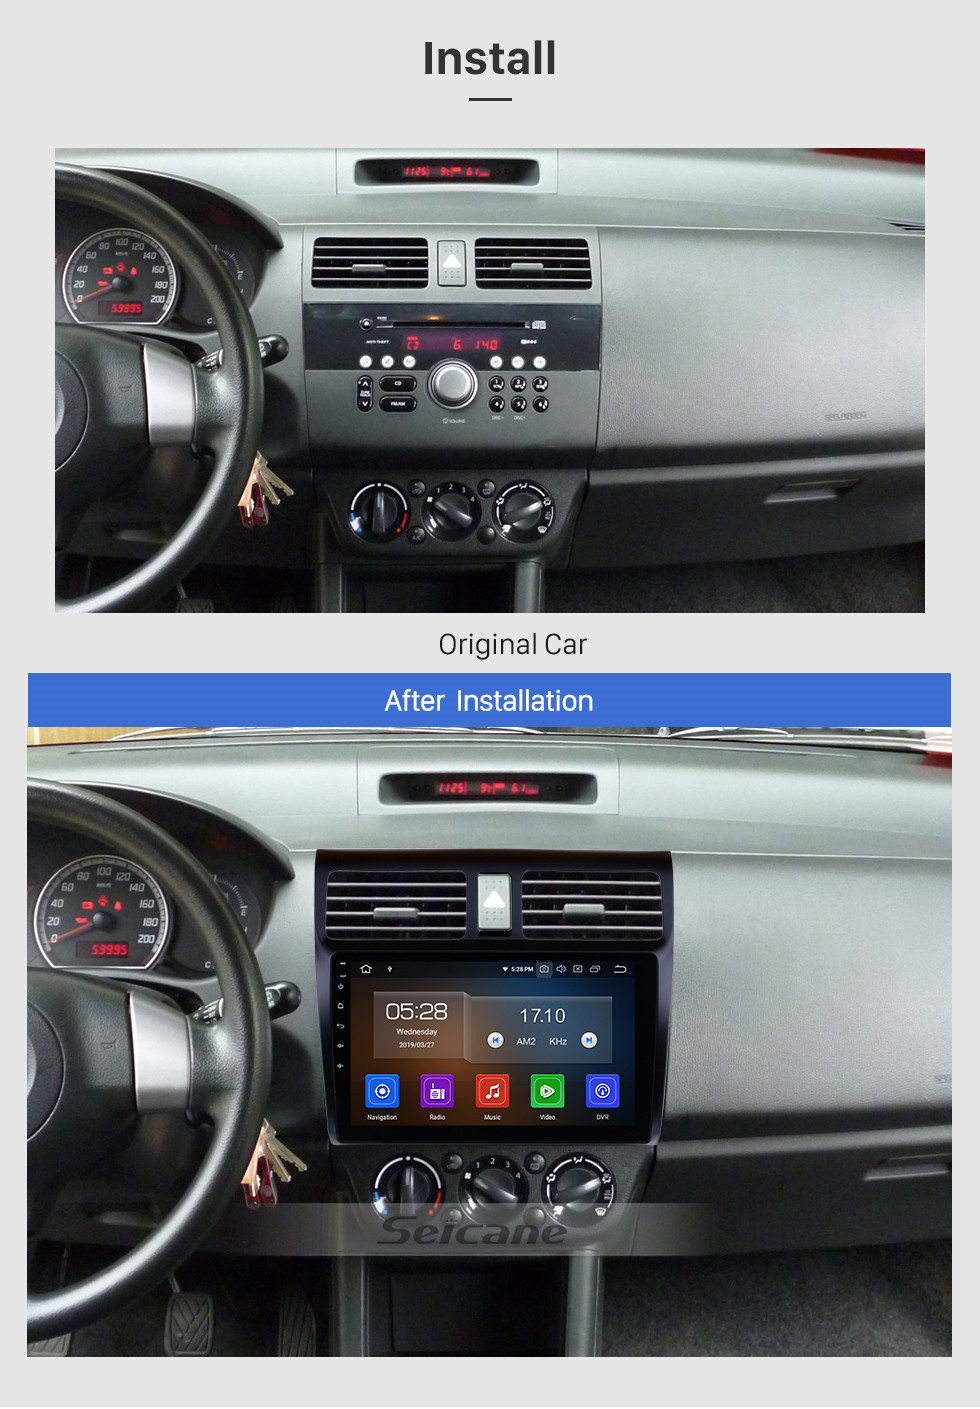 Seicane Aftermarket Radio 10.1 inch Android 10.0 GPS Navigation For 2005-2010 SUZUKI SWIFT Mirror Link Bluetooth WIFI Audio Support Rearview Camera 1080P Video DVR DAB+ DVD Player